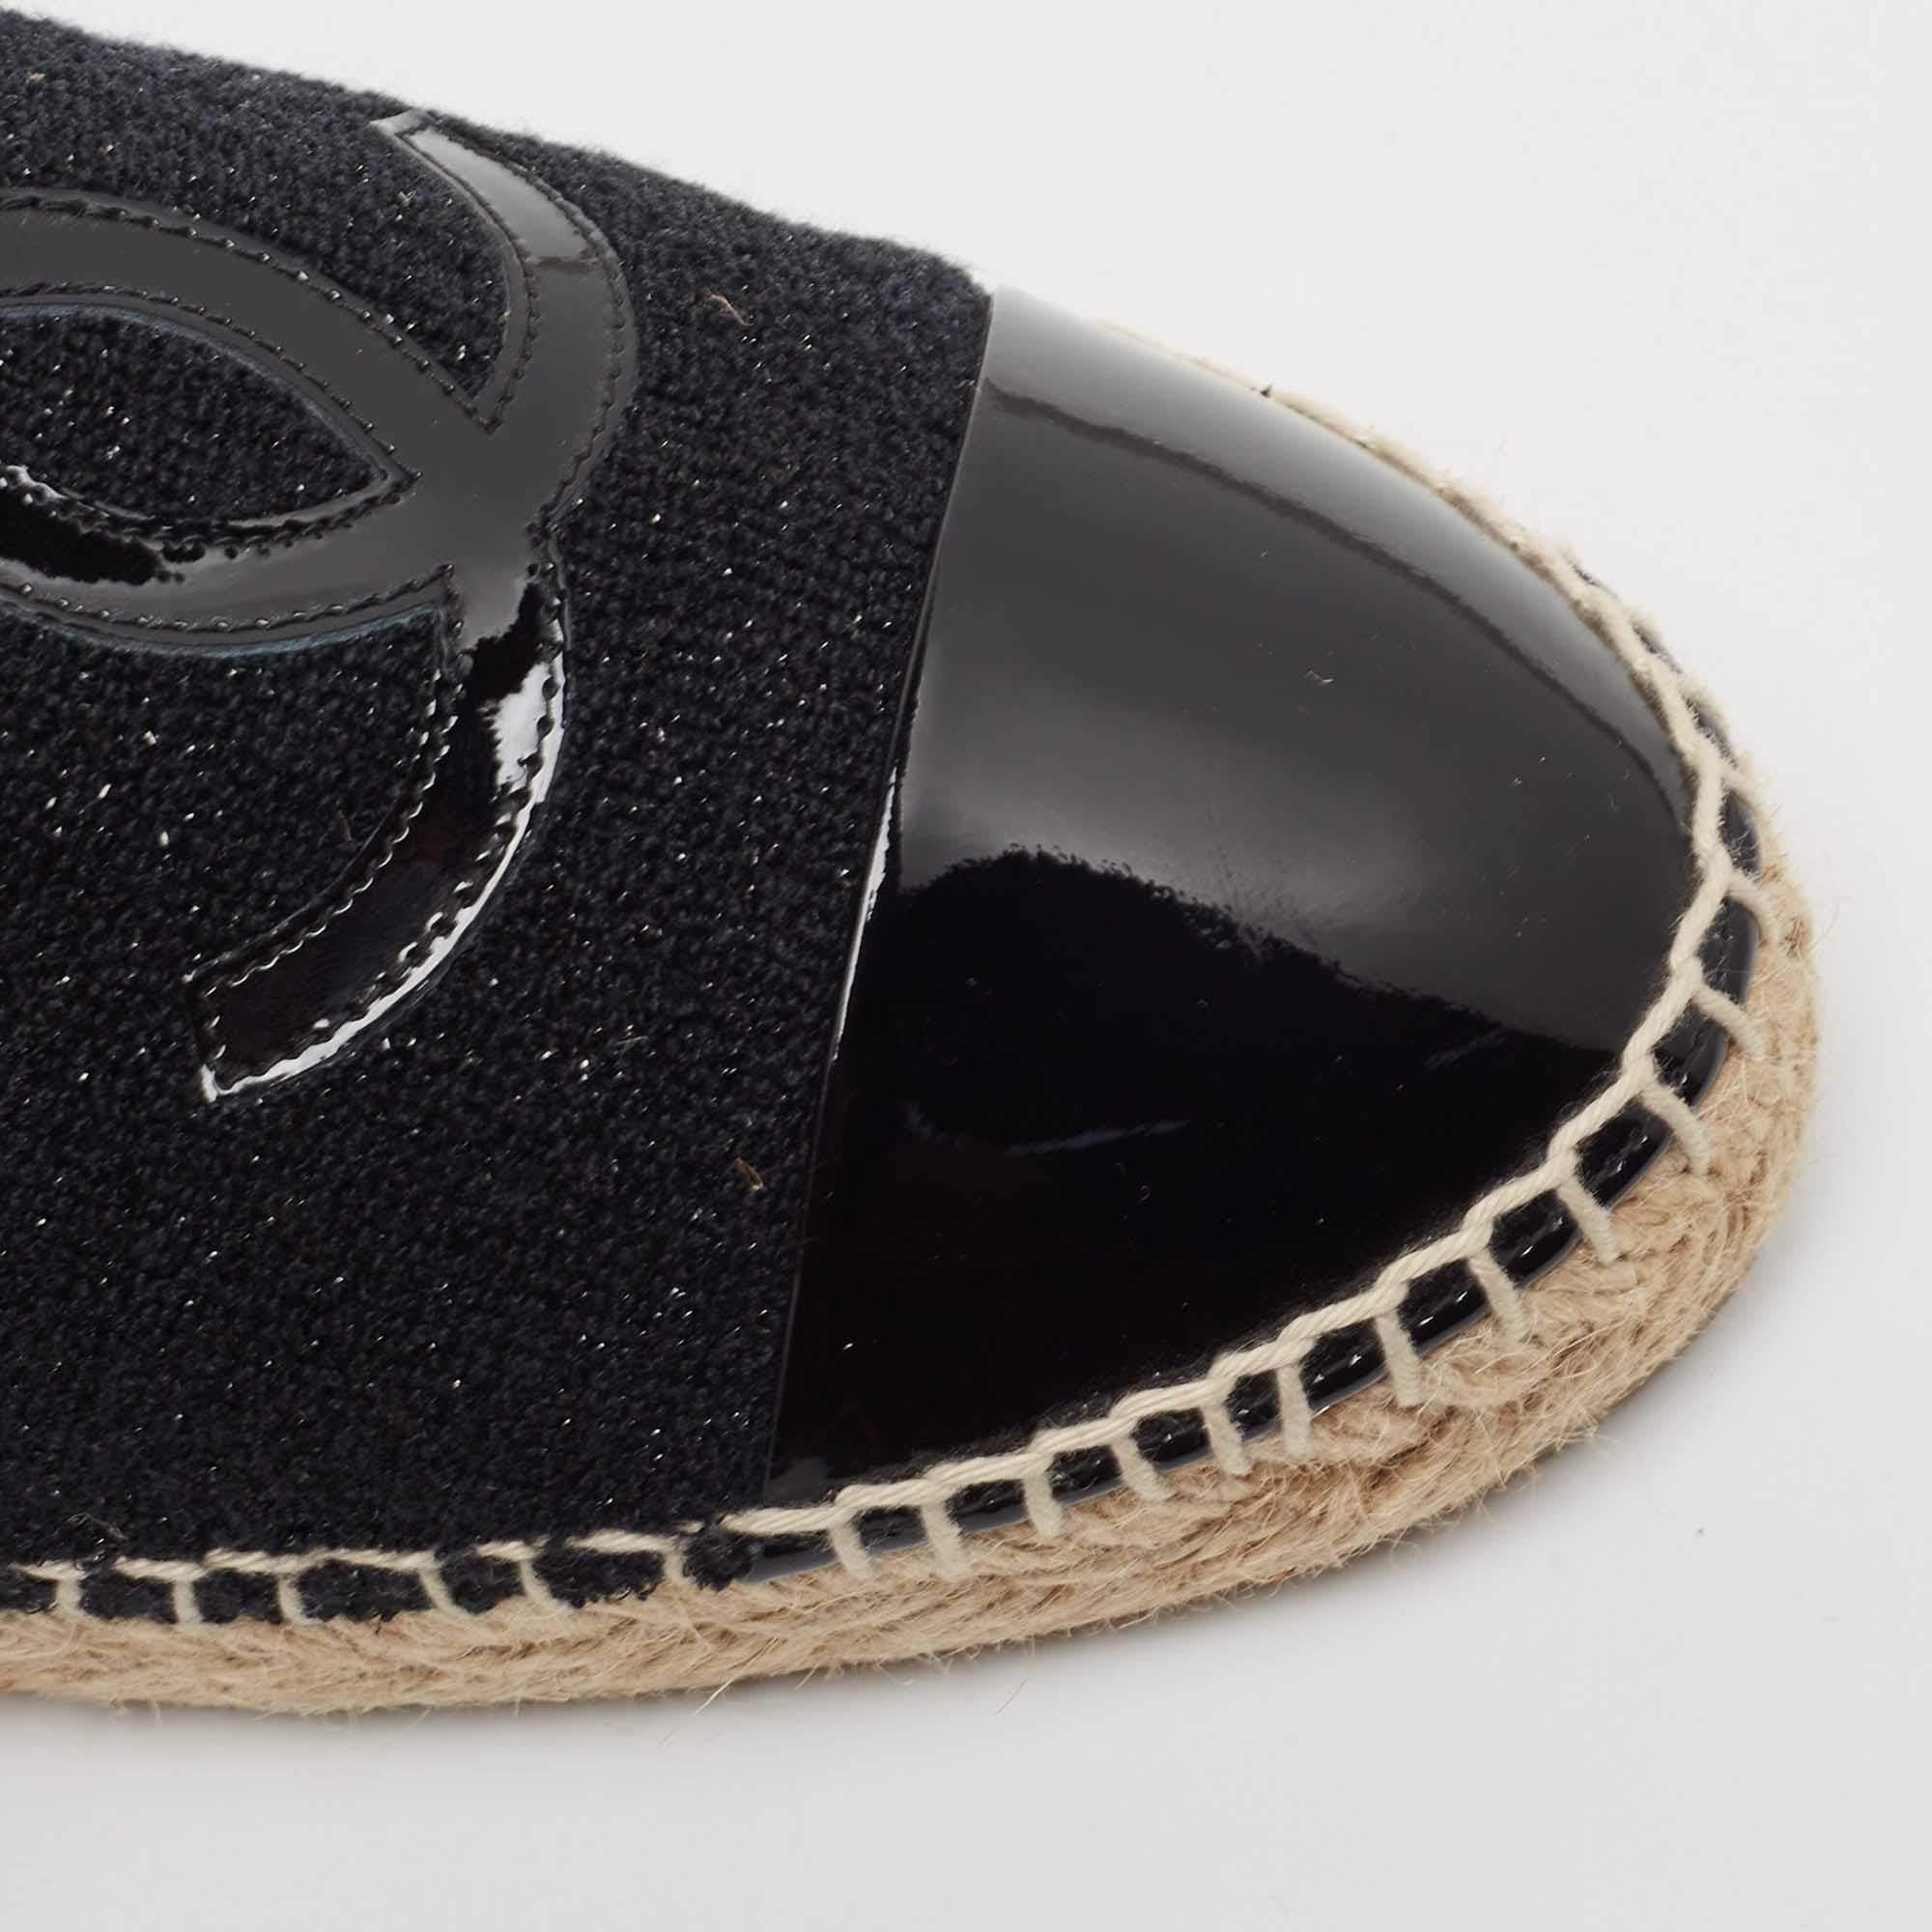 Chanel Black Tweed and Patent CC Espadrille Flats Size 39 3